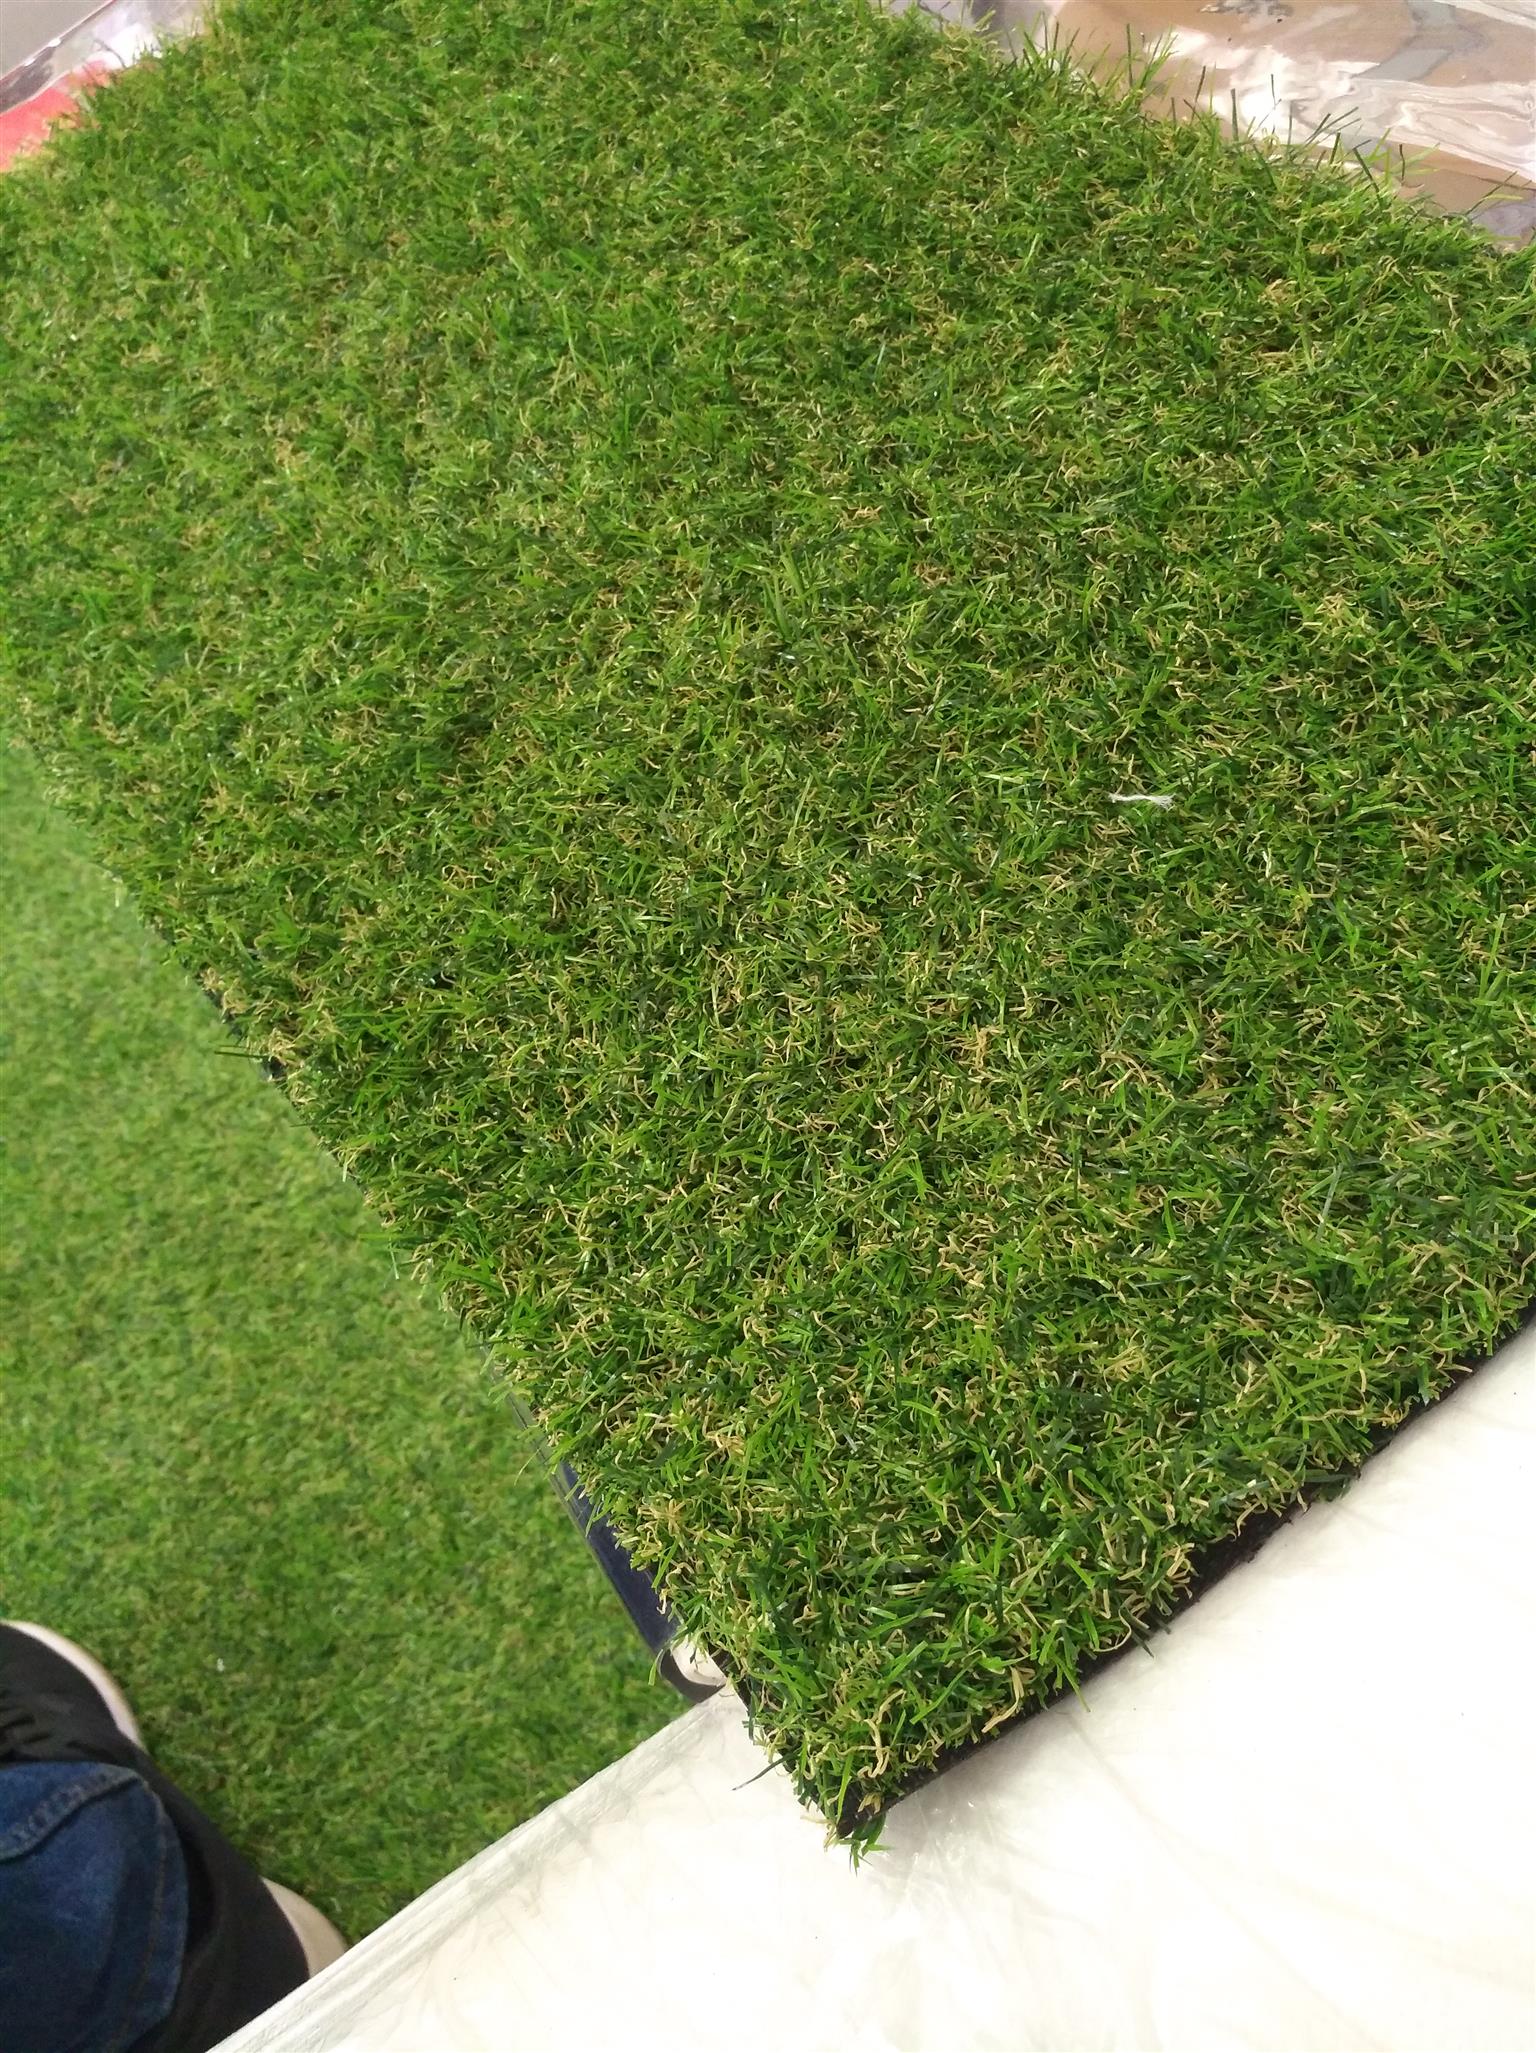 30mm thick(25 meters Artificial Grass rolls for sale